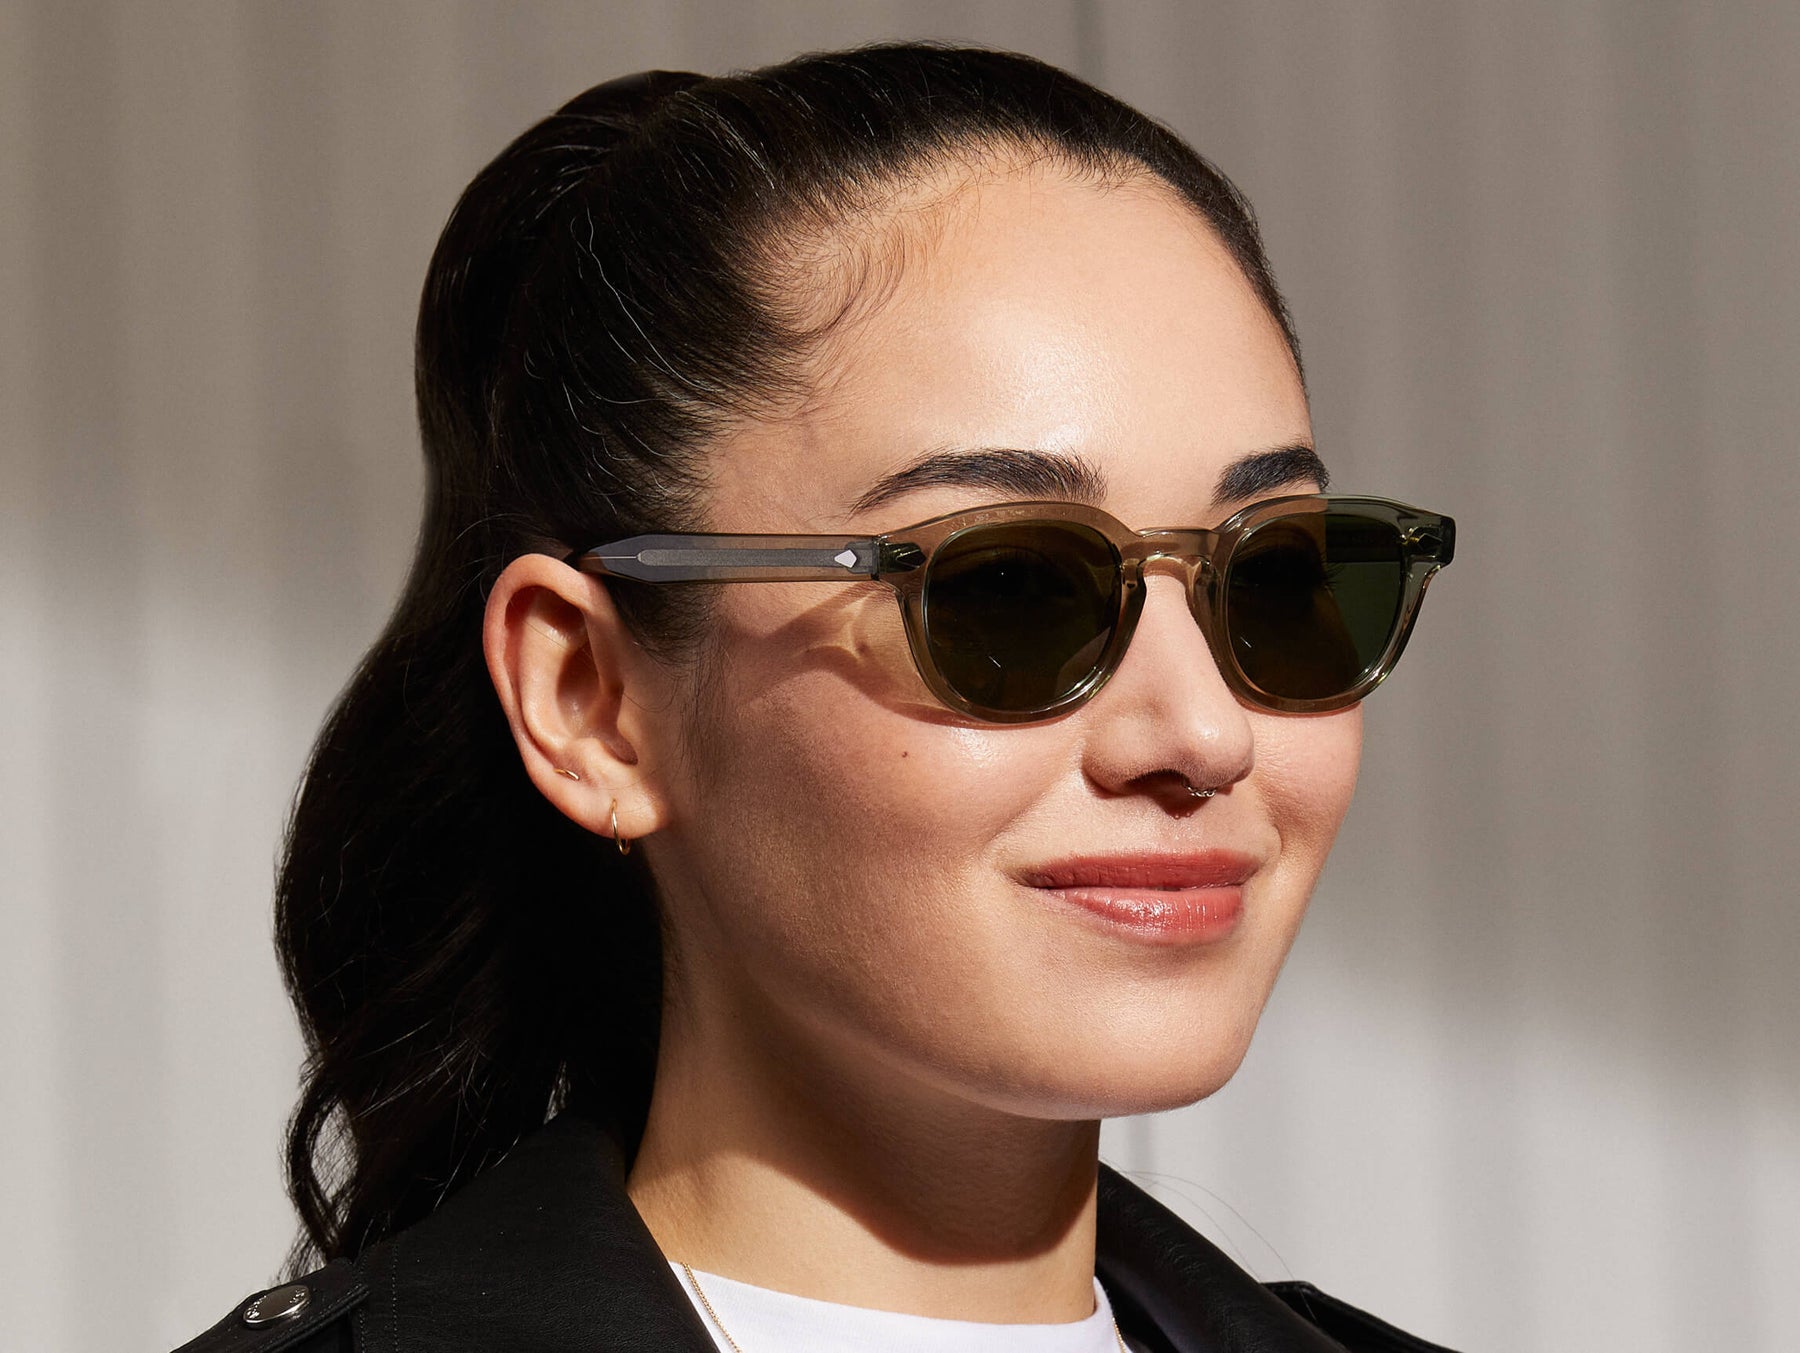 Model is wearing The LEMTOSH SUN in Sage in size 44 with G-15 Glass Lenses